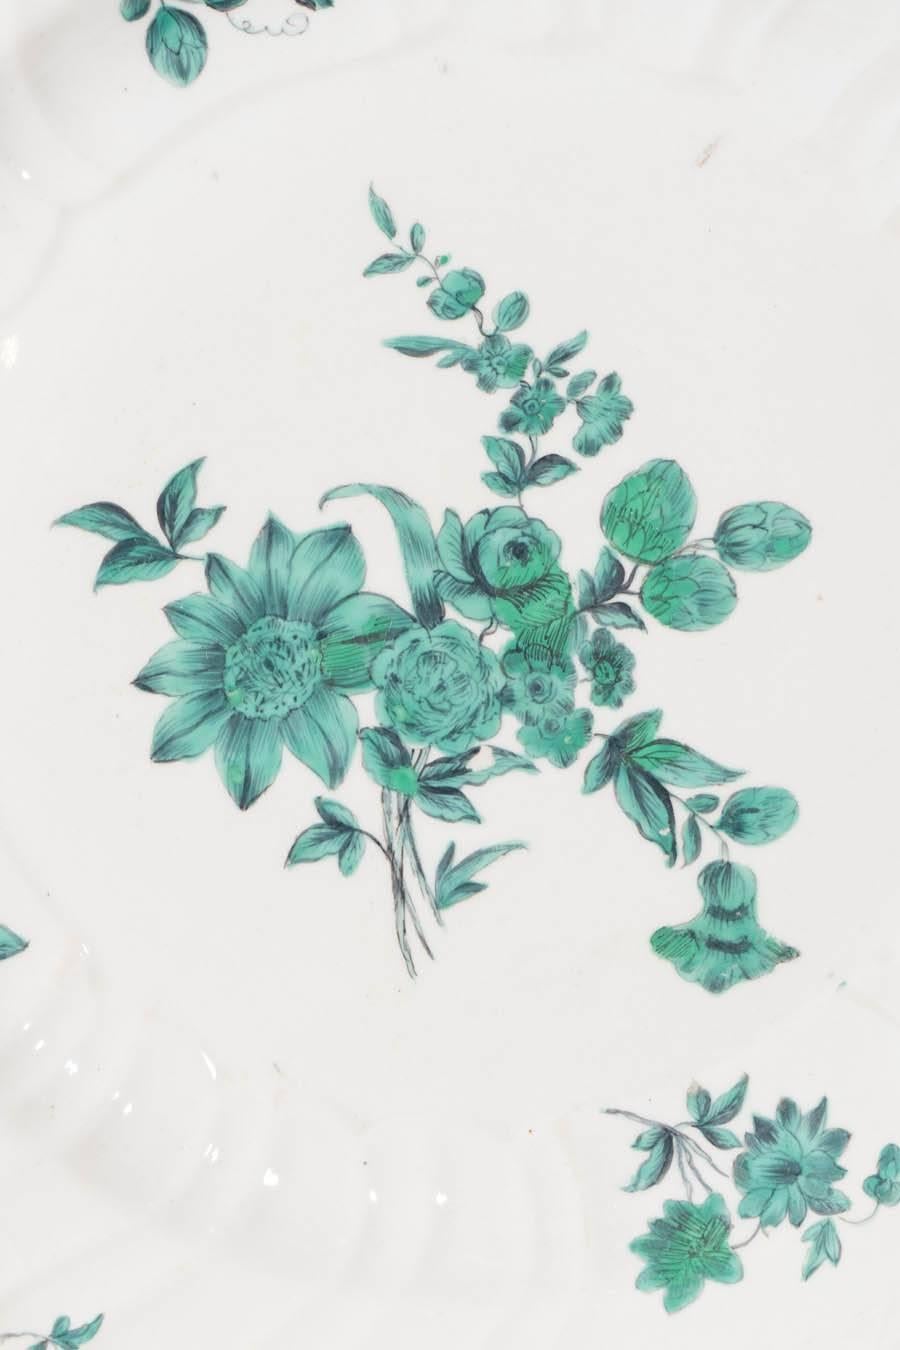 Each dish is decorated with unique hand-painted bouquets of flowers painted in a deep green. The borders are impressed with a subtle basket weave design. The gilded edges are softly lobed. The overall effect is lovely, very much in the style of